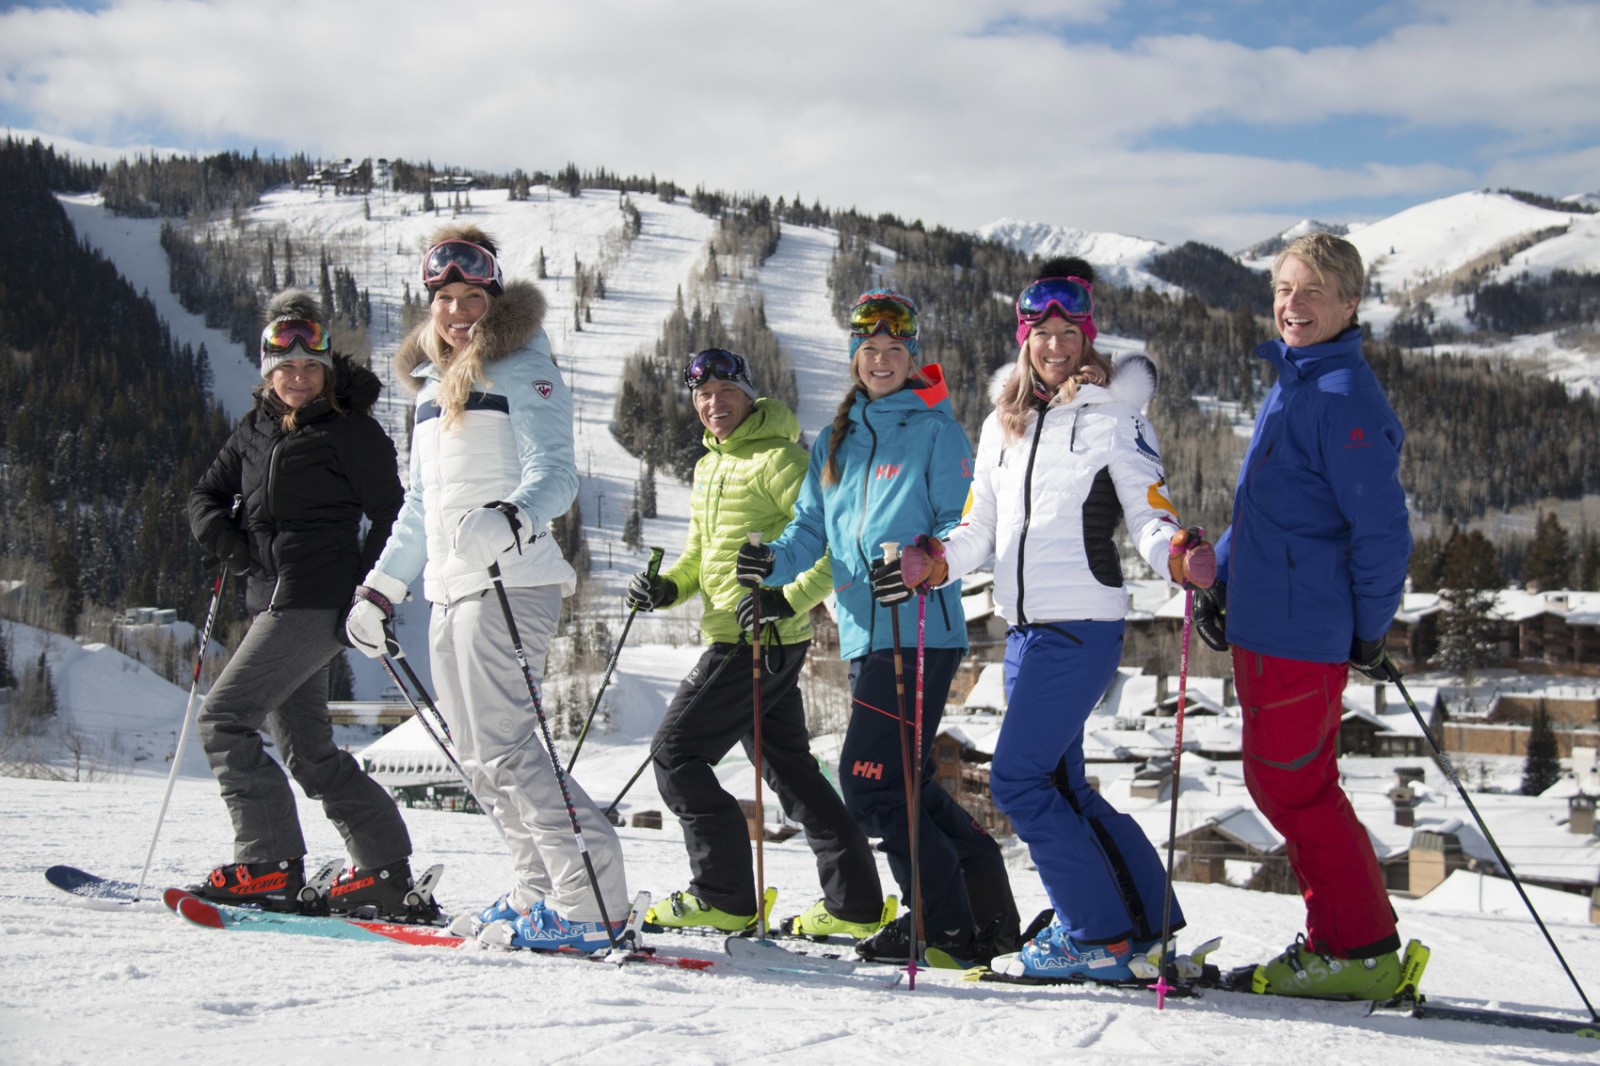 Experience of a Lifetime: Skiing With a Champion at Deer Valley Resort